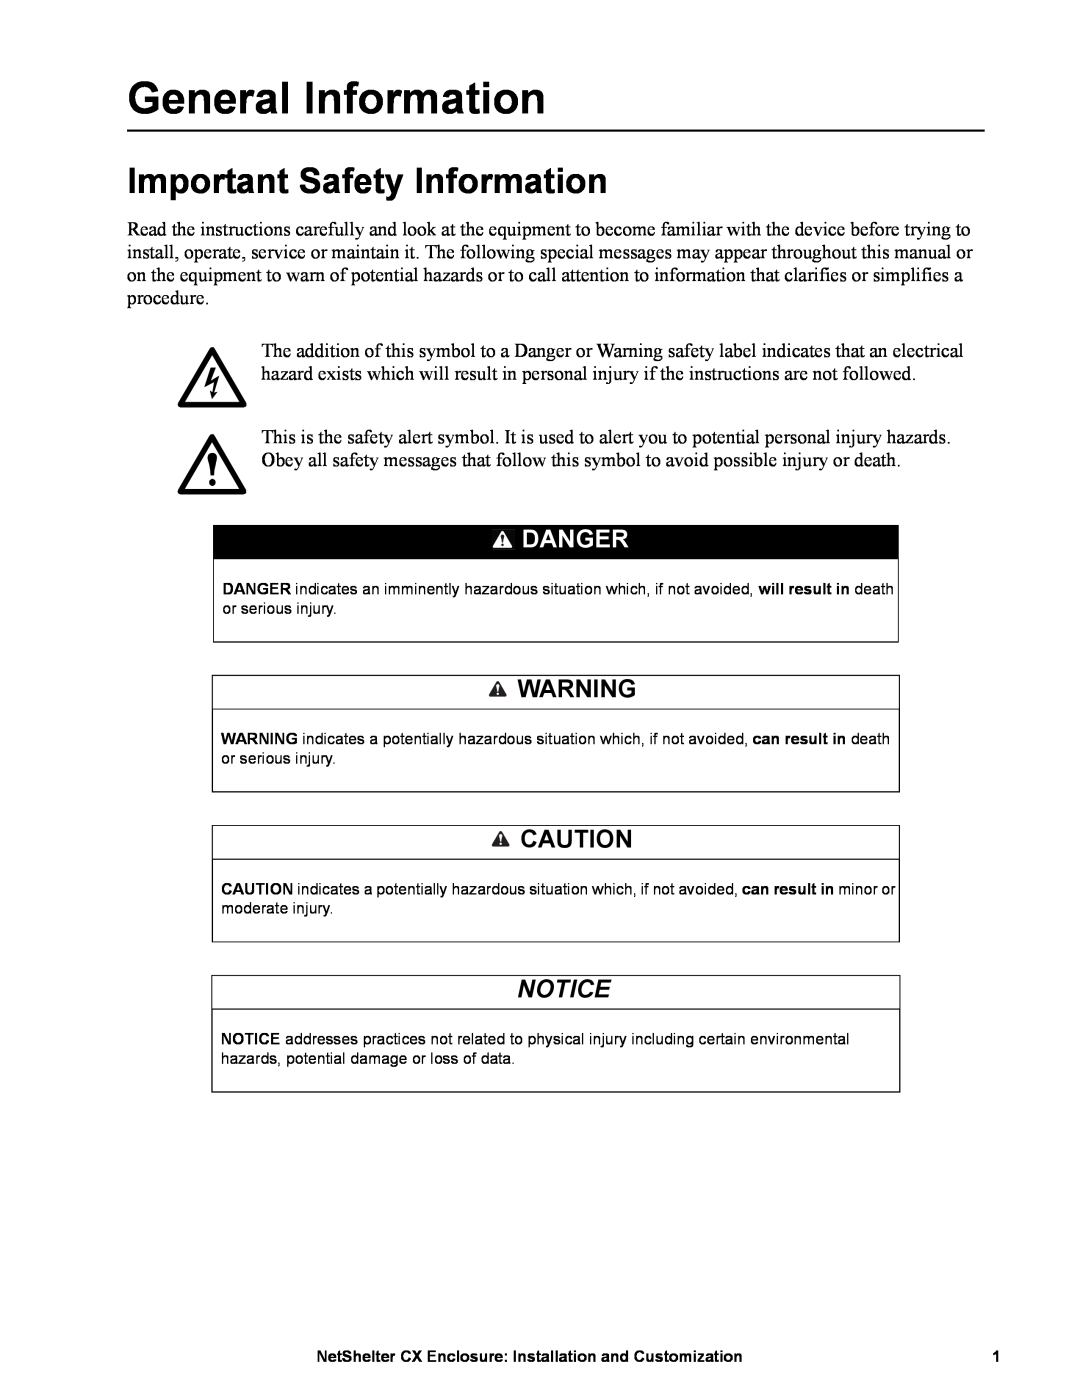 APC AR4038A, NS1435A manual General Information, Important Safety Information, Danger 